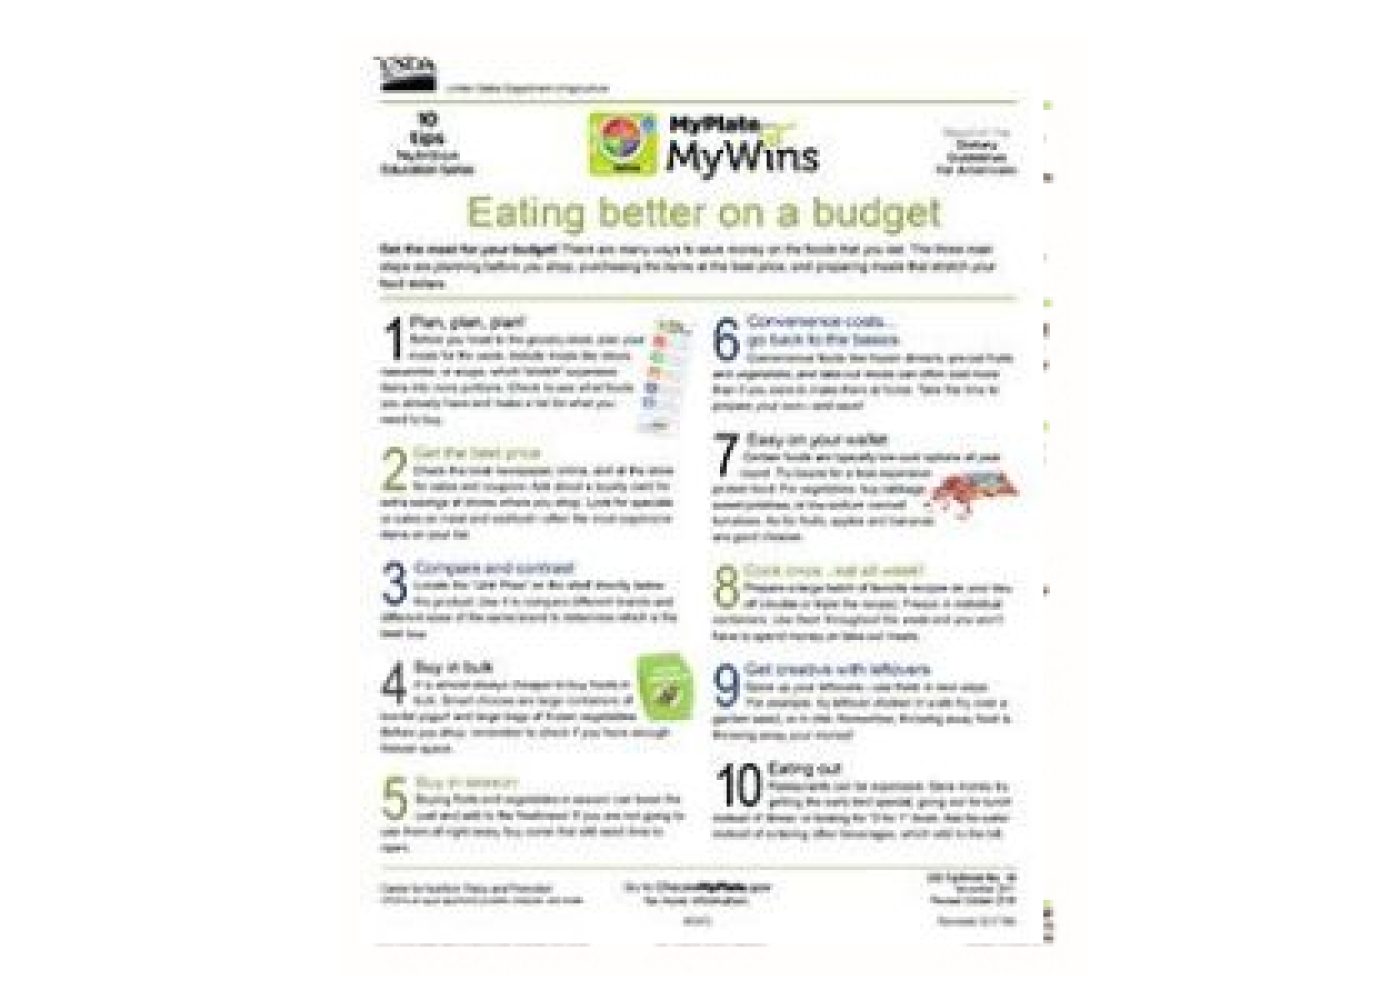 Thumbnail of "Eating Better on a Budget" handout